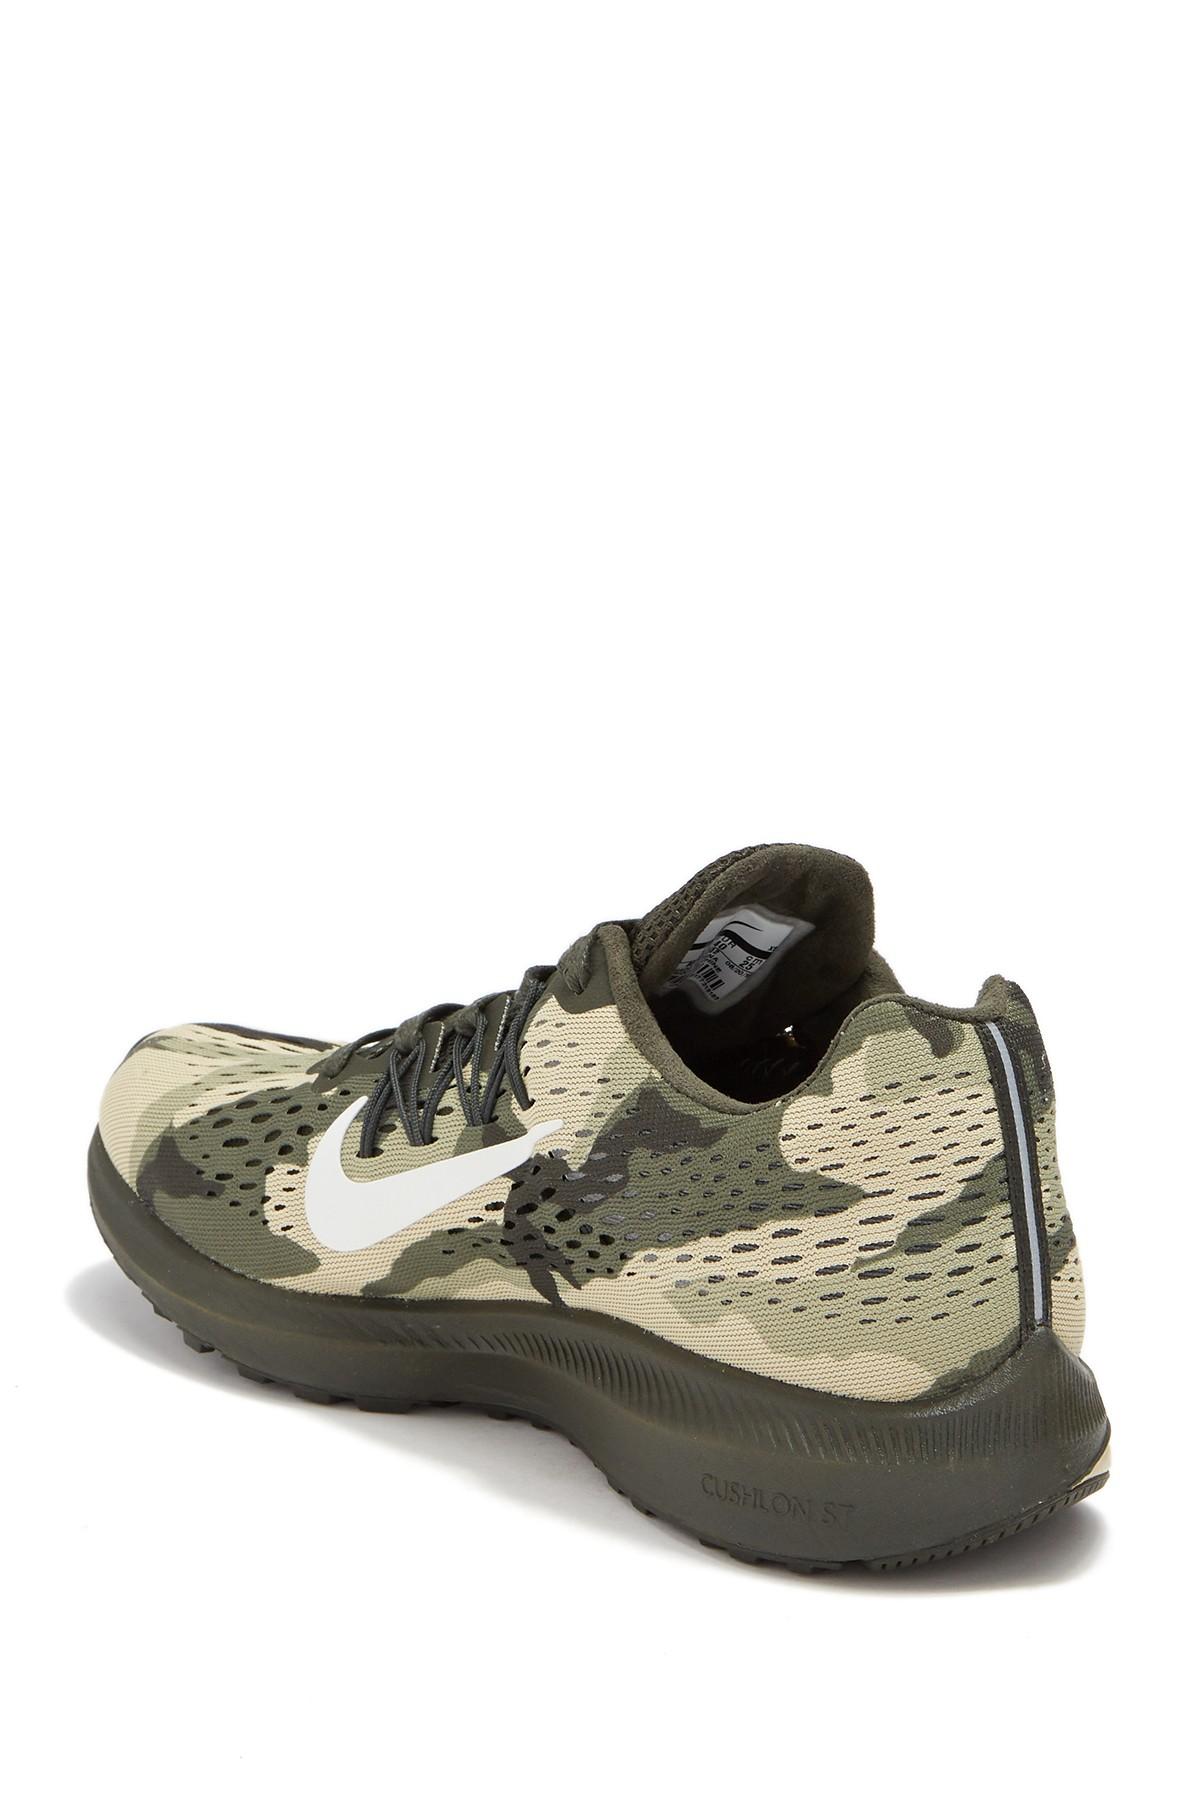 Nike Lace Air Zoom Winflo 5 Camo Running Shoe in Green for Men - Lyst